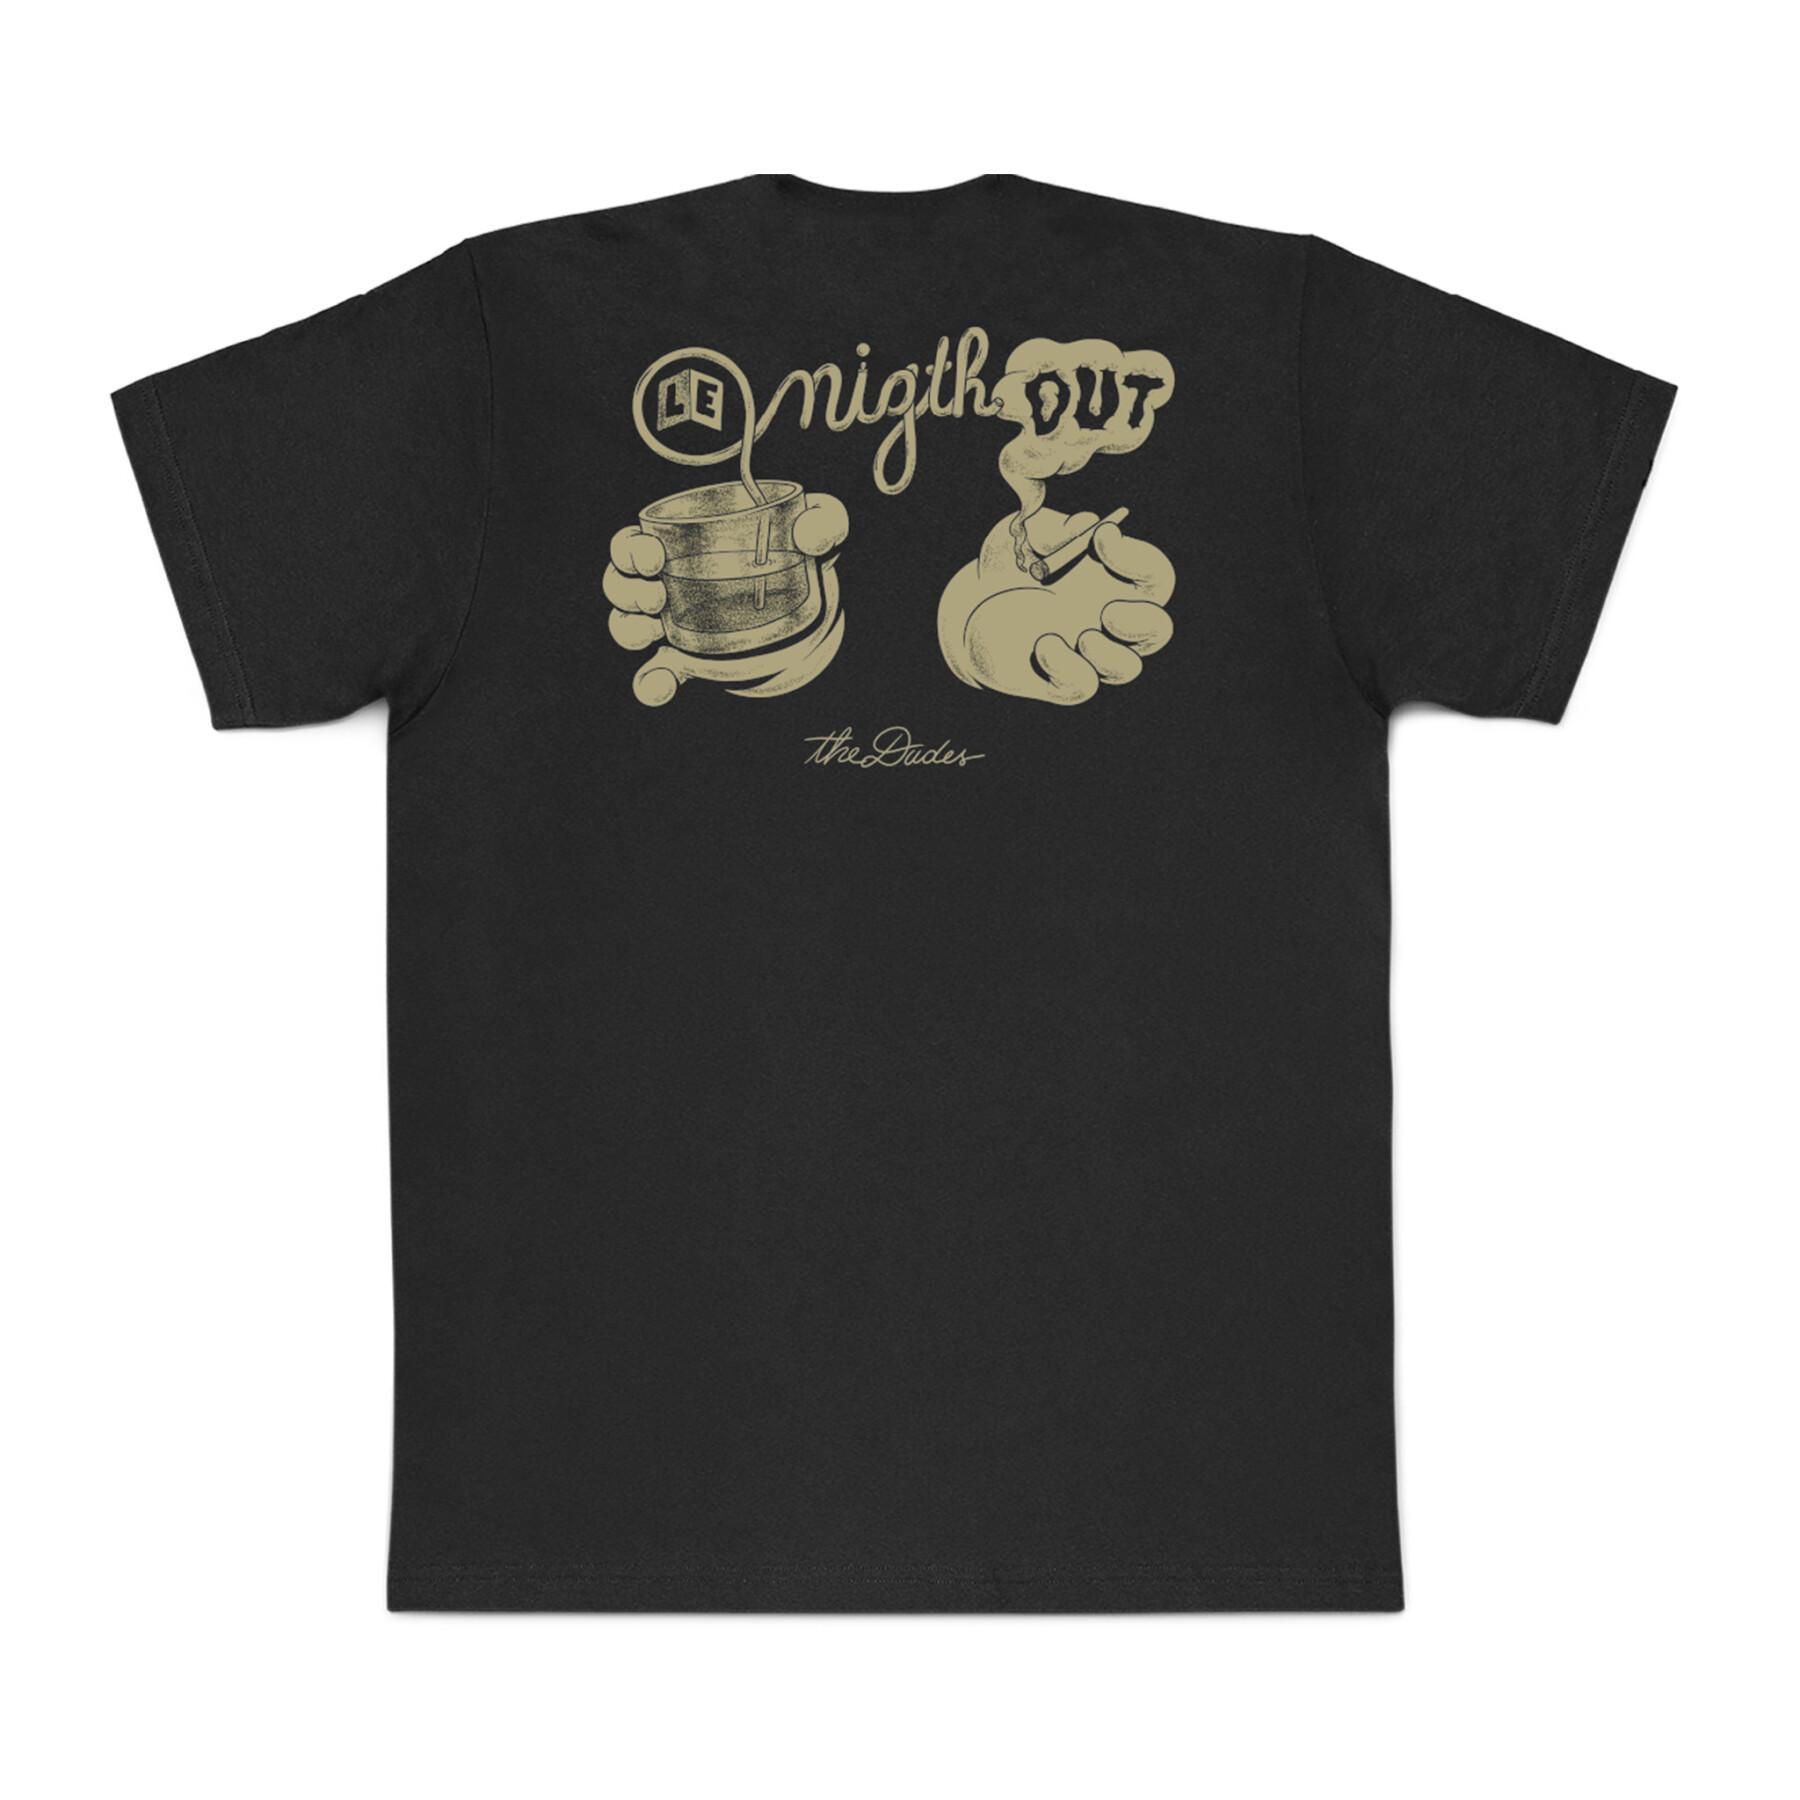 Camiseta The Dudes Le Night Out